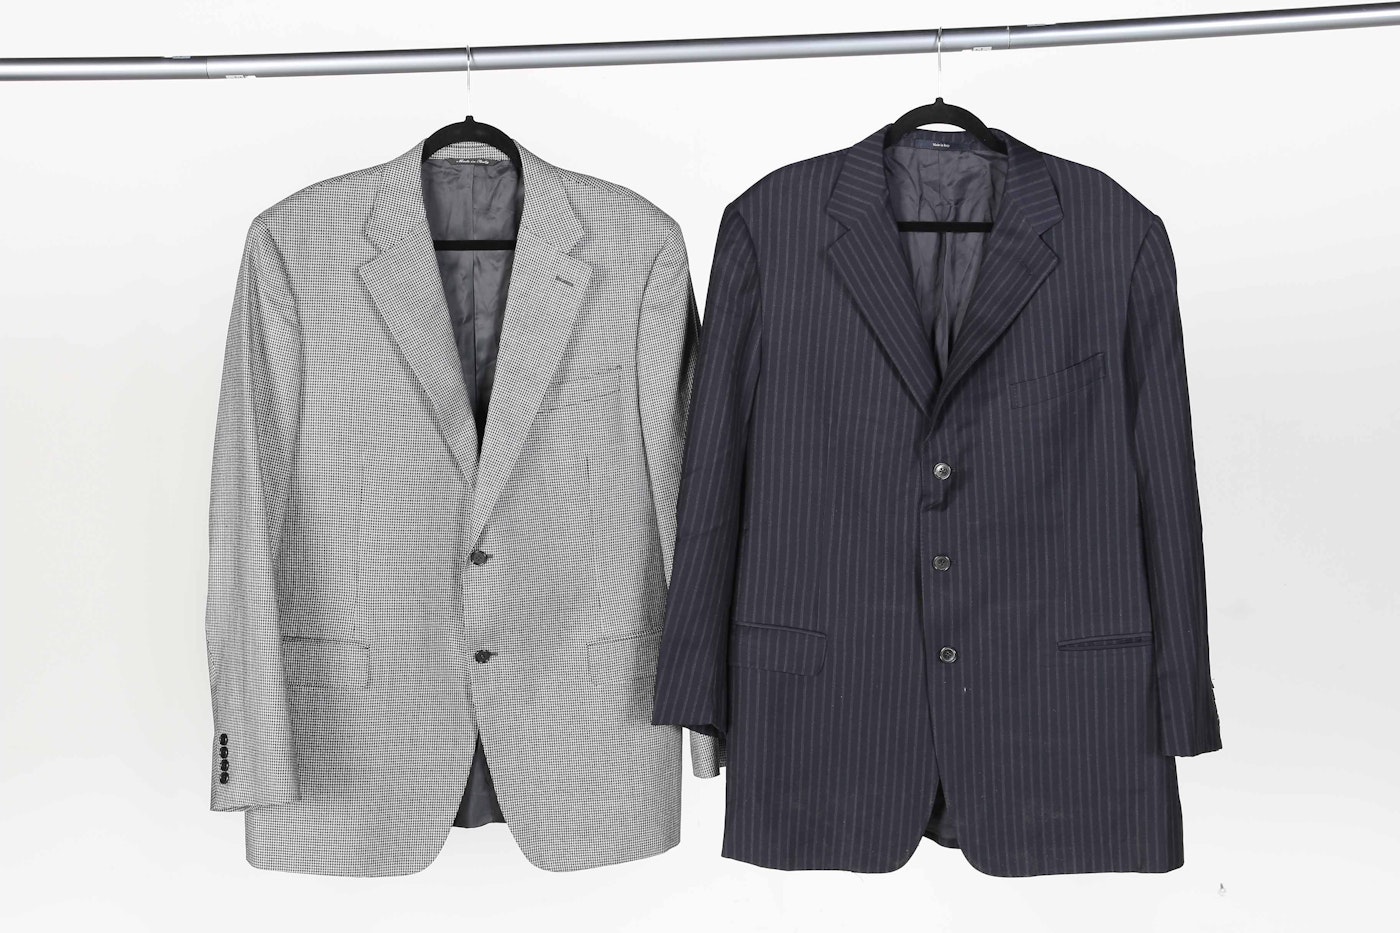 Collection of Men's Italian Suit Jackets | EBTH